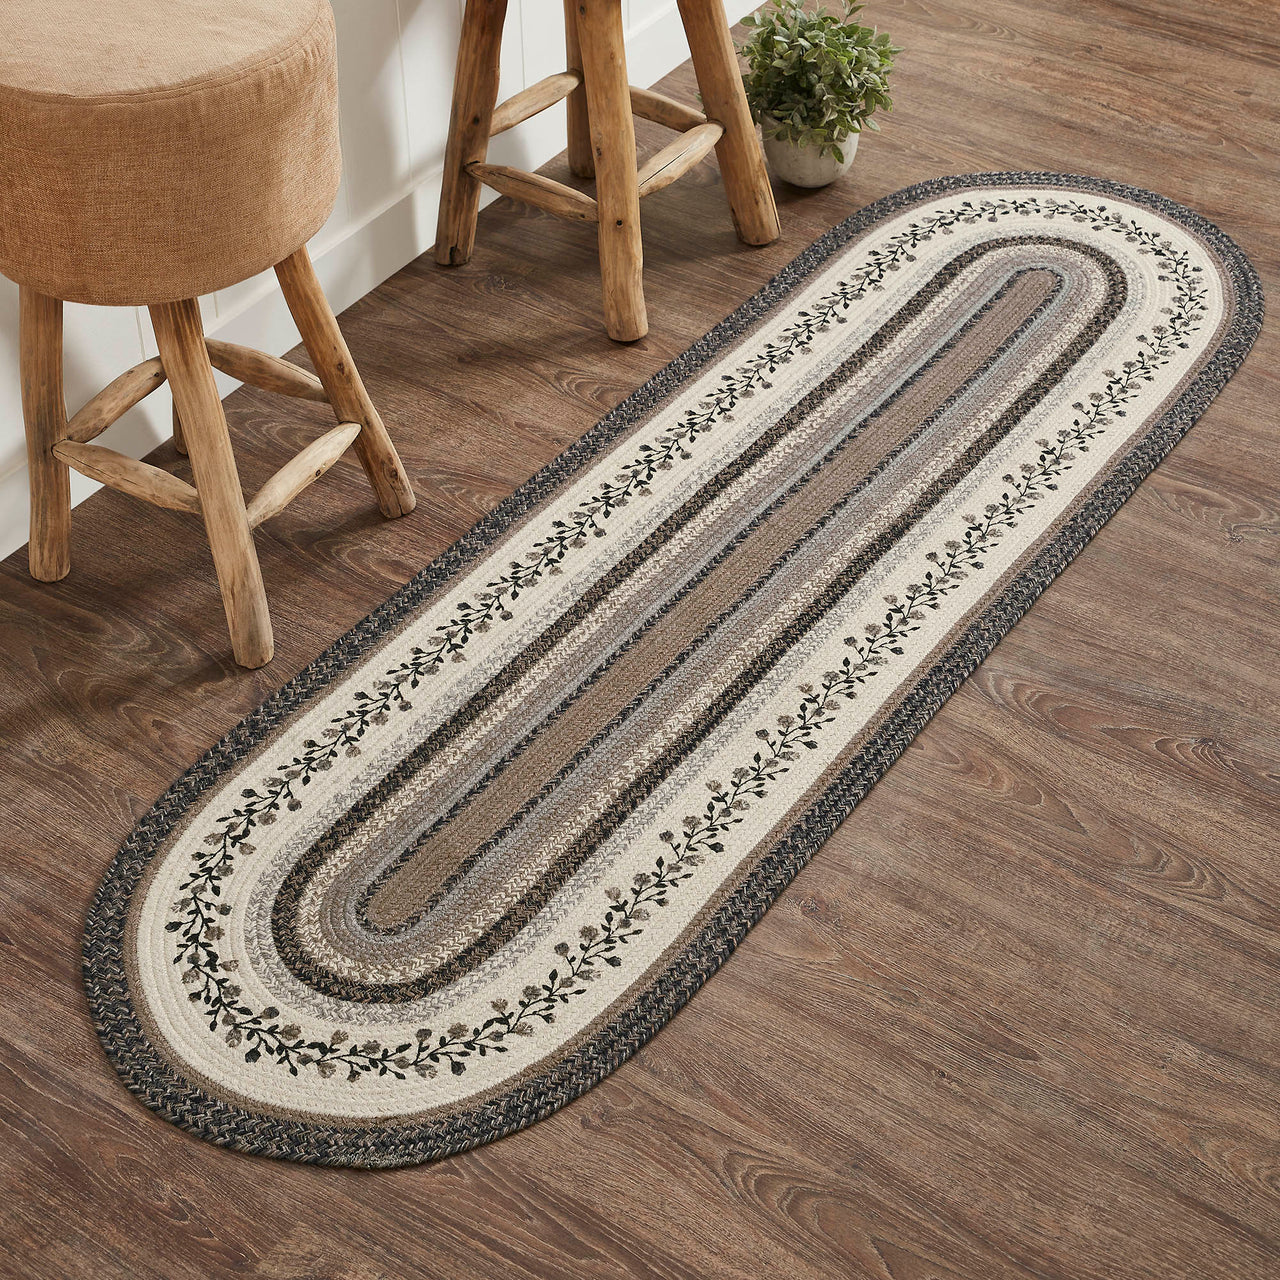 Floral Vine Jute Oval Braided Runner Rug with Rug Pad 24"x78"(2'x6.5') VHC Brands